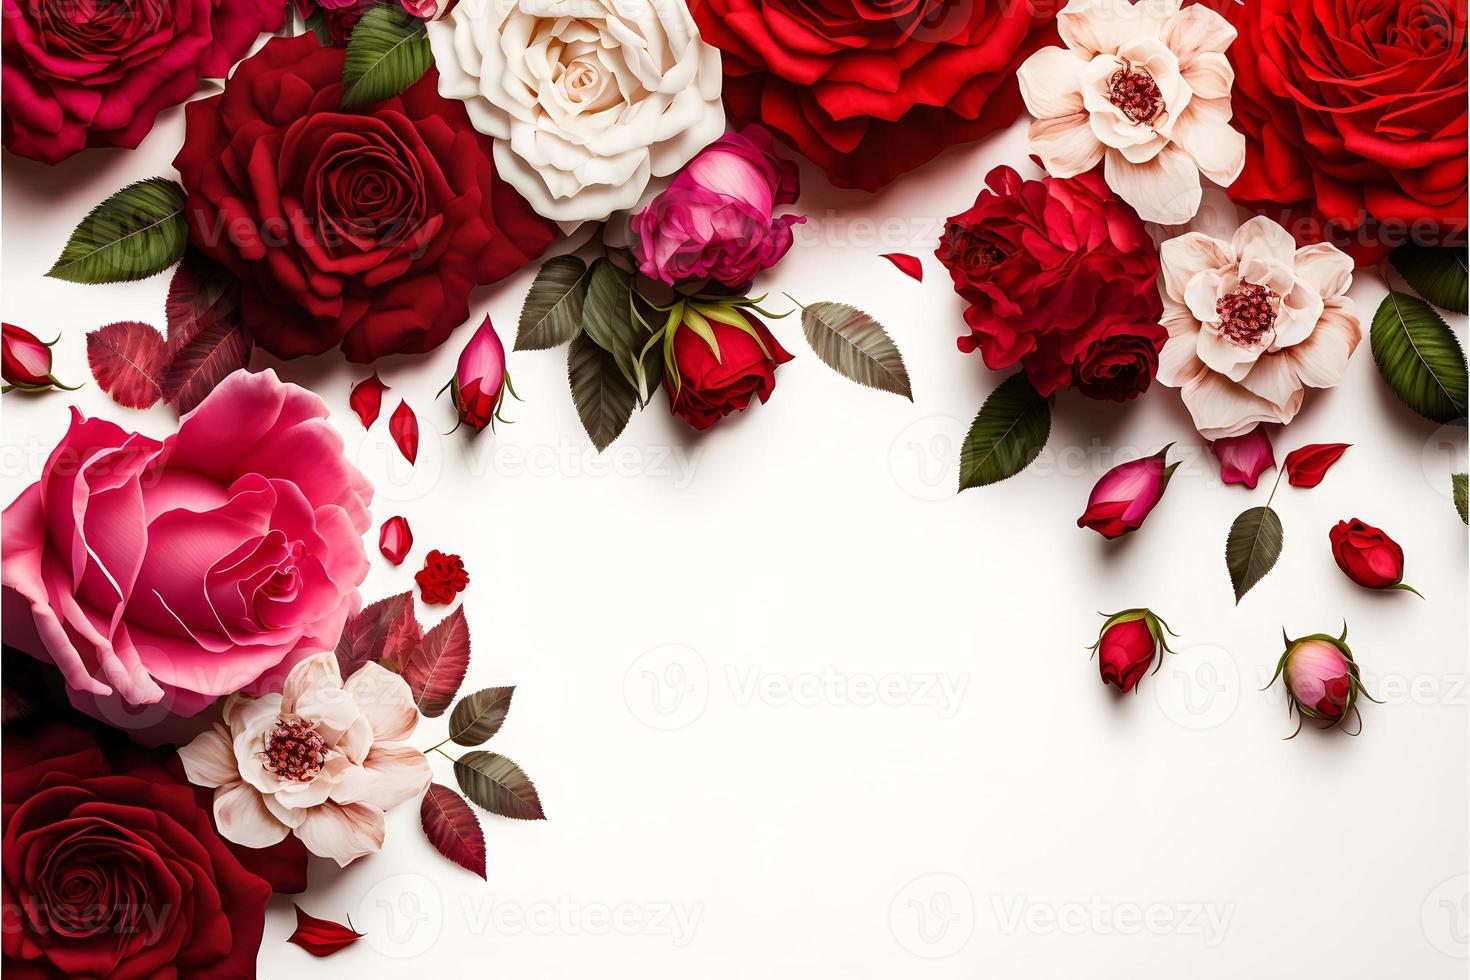 A stunning image featuring a red and pink rose flower with a blank space in the middle, perfect for adding text or overlaying graphics. This photo is ideal for use on social media, websites